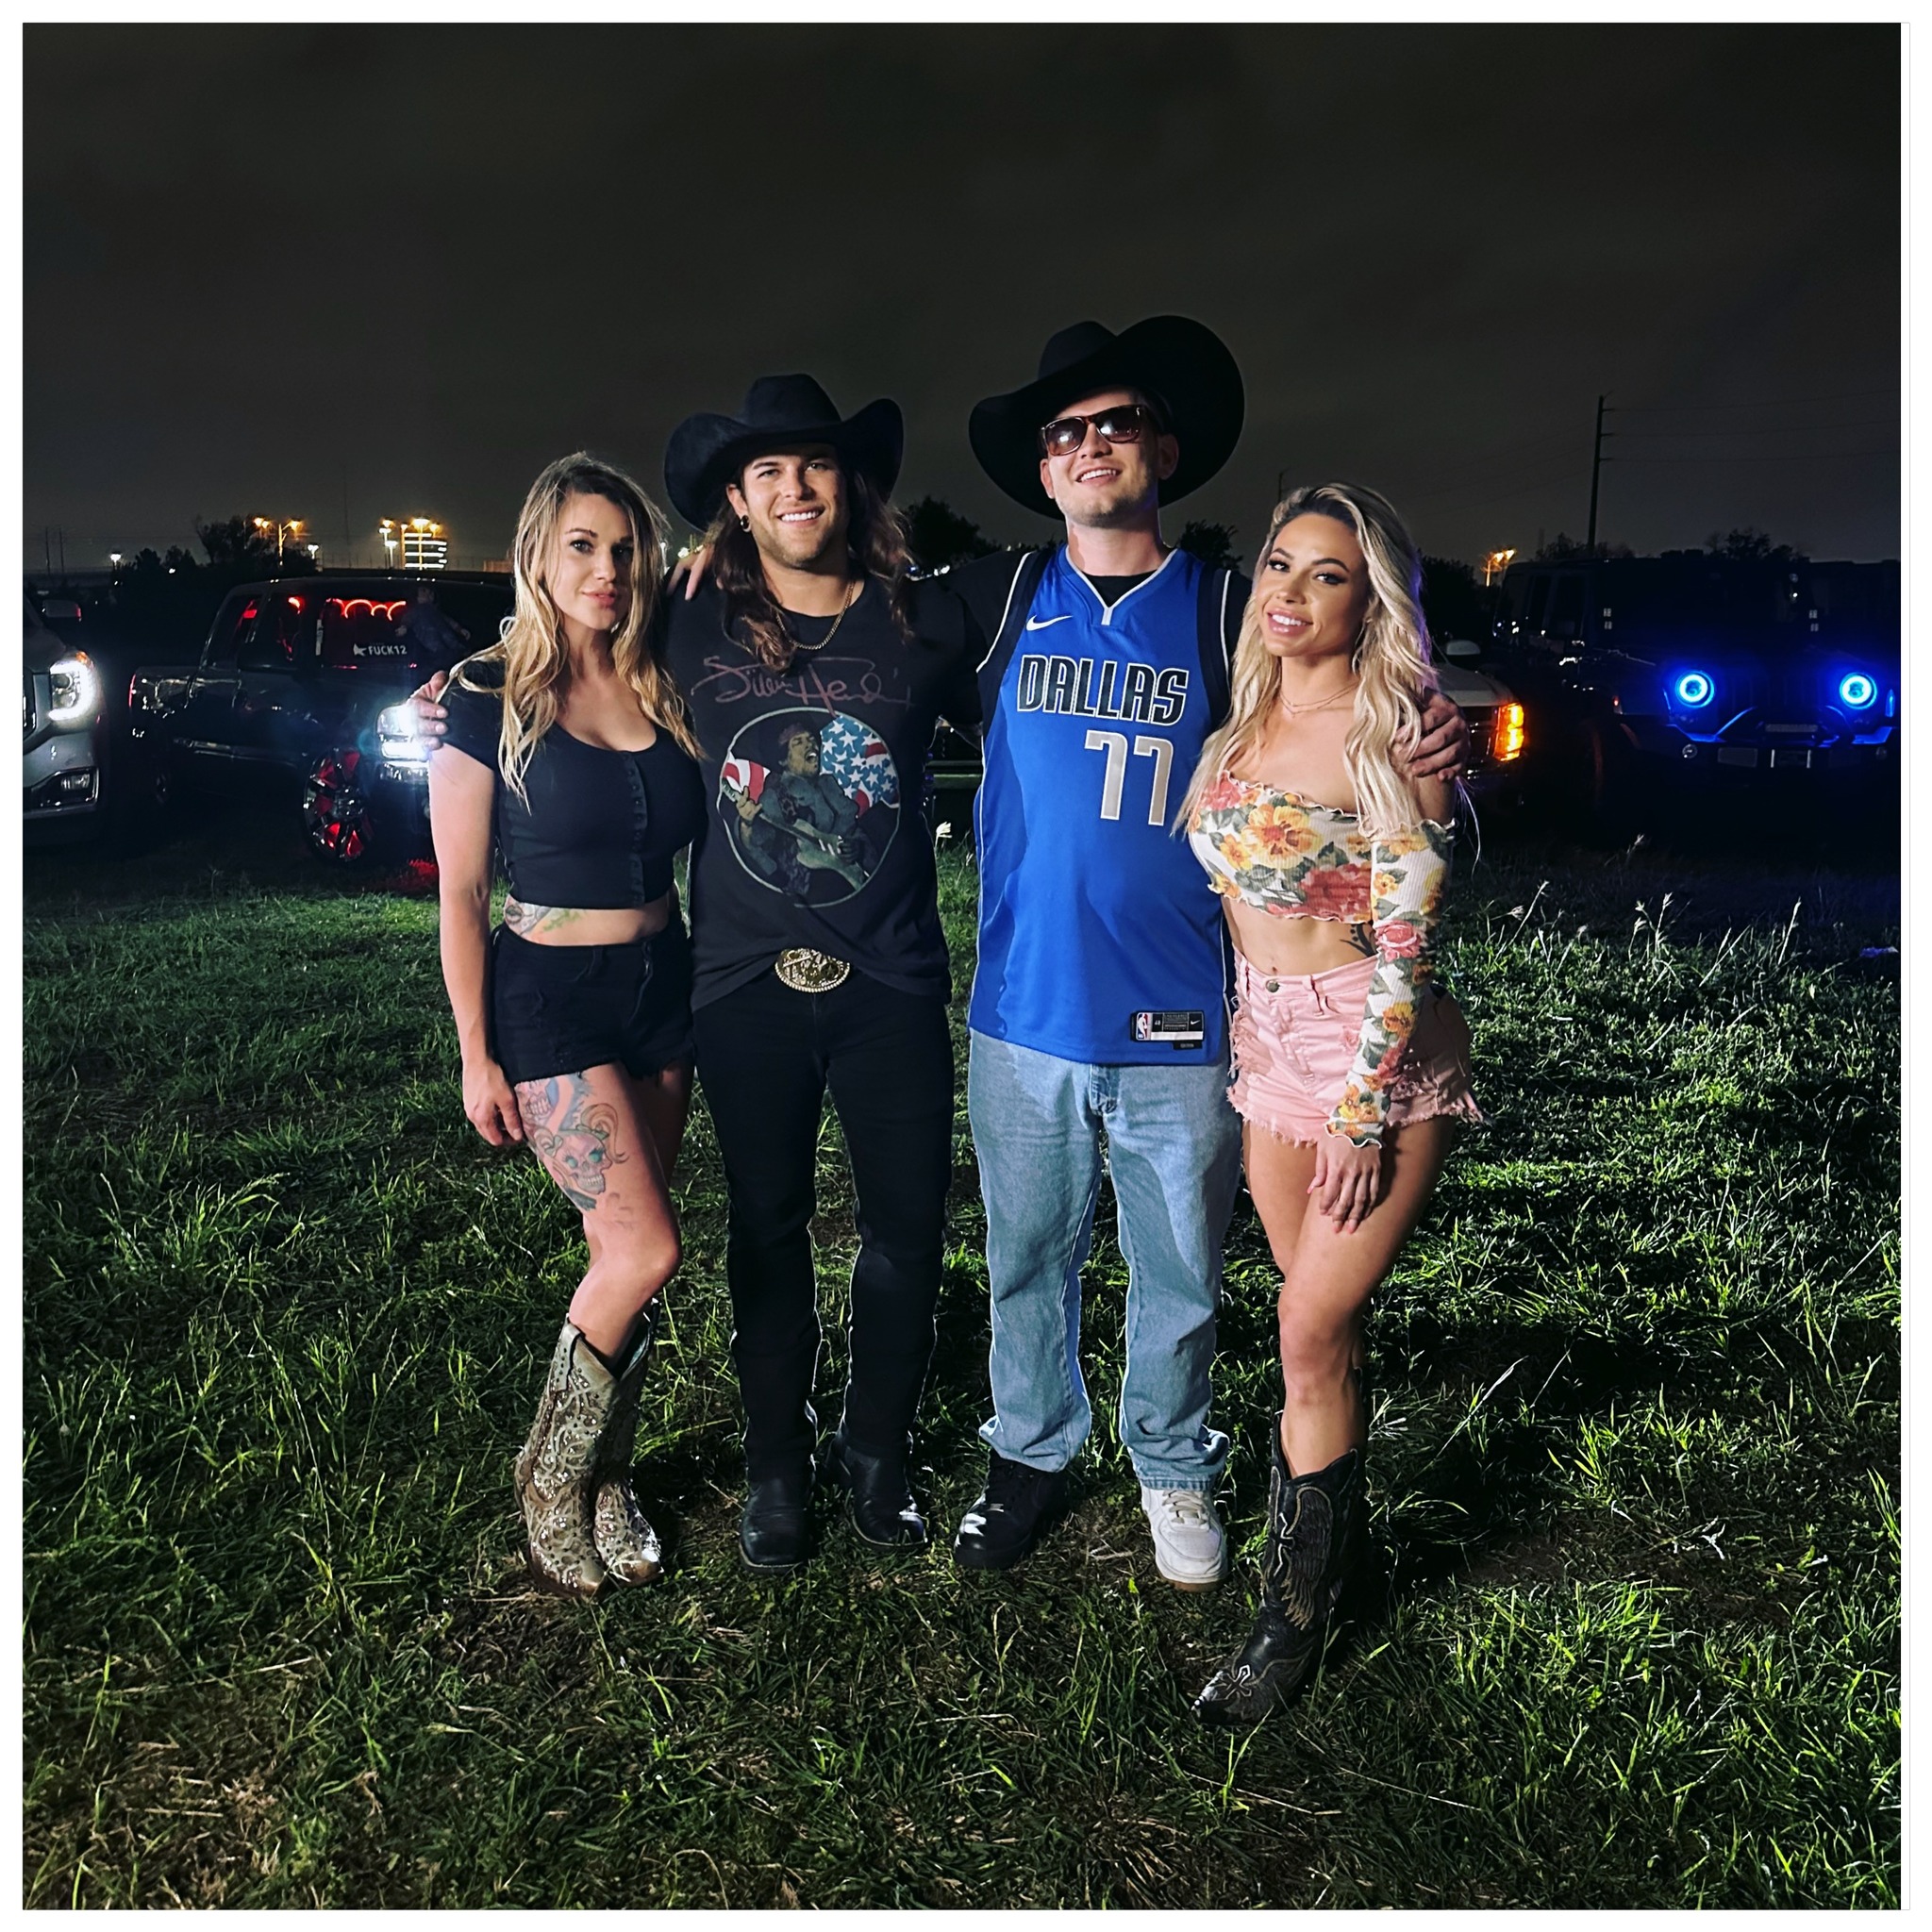 That’s a wrap!! Can’t wait for you all to hear my new song “TEXAS BOI” ft. @gringothemc 🤠  thank you @babybash for making this all happen and to @dangfilms & @oneandonlypyrexx for always doing an amazing job filming and shining 💥 

#TEXASBOI #RonnieBowen #Featuring #MCGringo